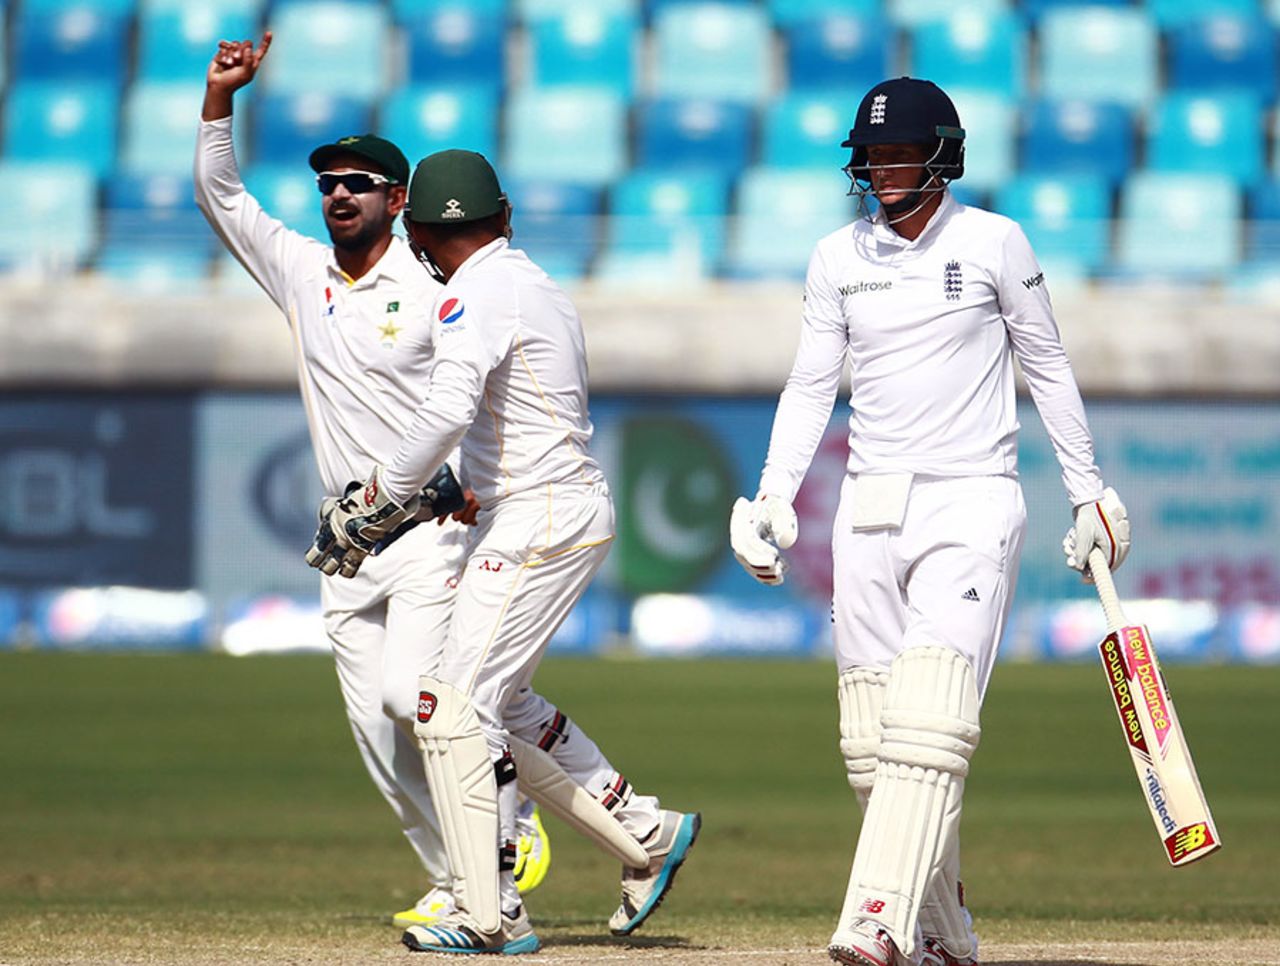 Joe Root edged to slip to fall for 71, Pakistan v England, 2nd Test, Dubai, 5th day, October 26, 2015